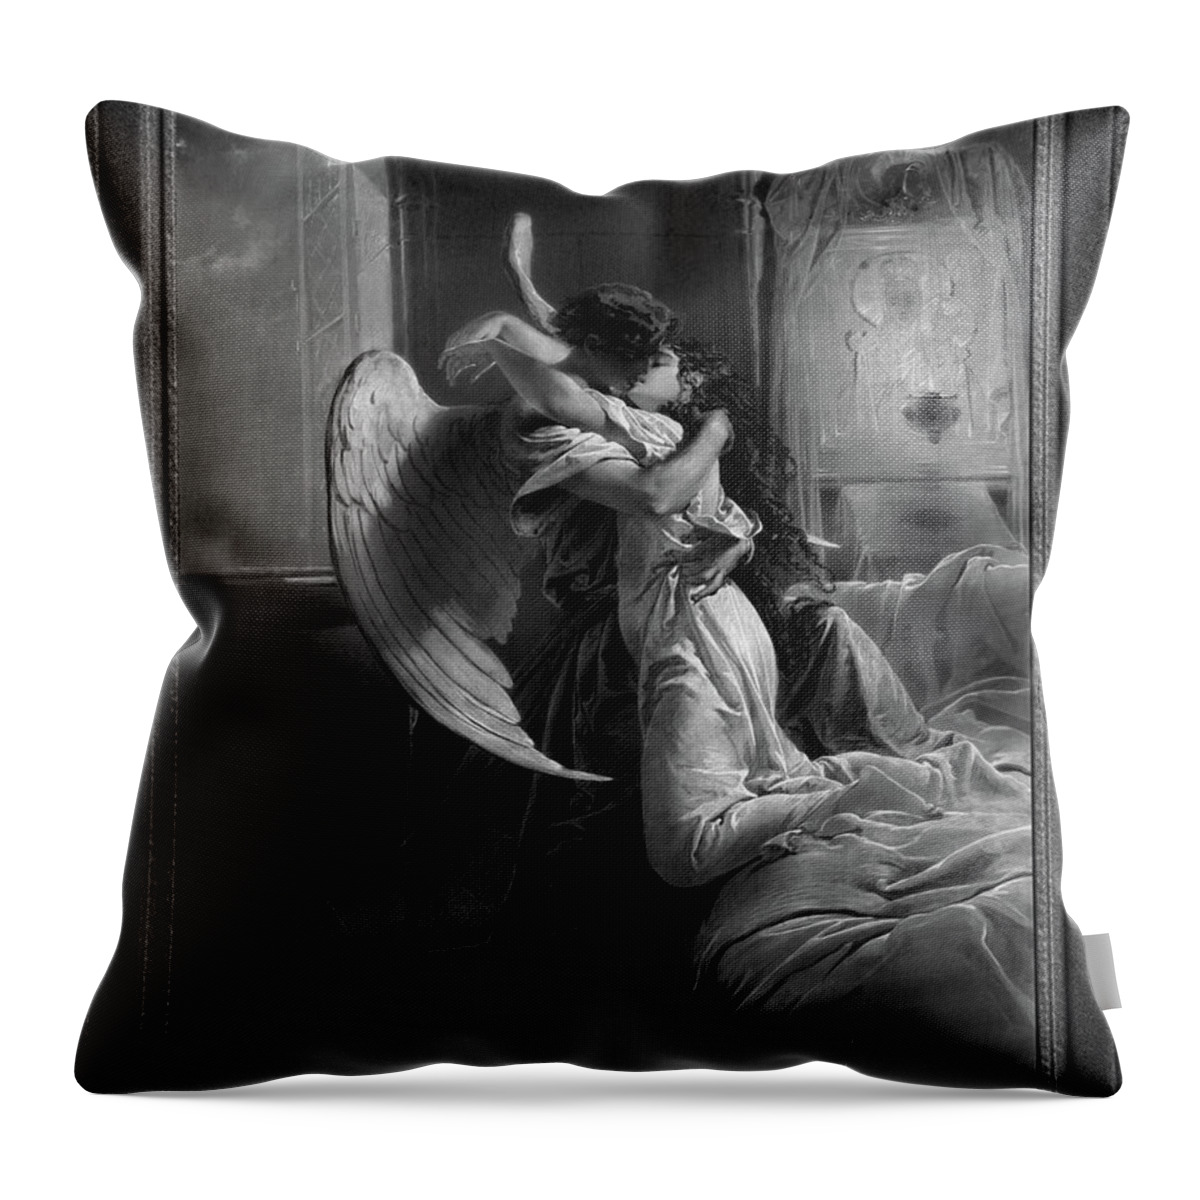 Romantic Encounter Throw Pillow featuring the painting Romantic Encounter by Mihaly von Zichy by Rolando Burbon